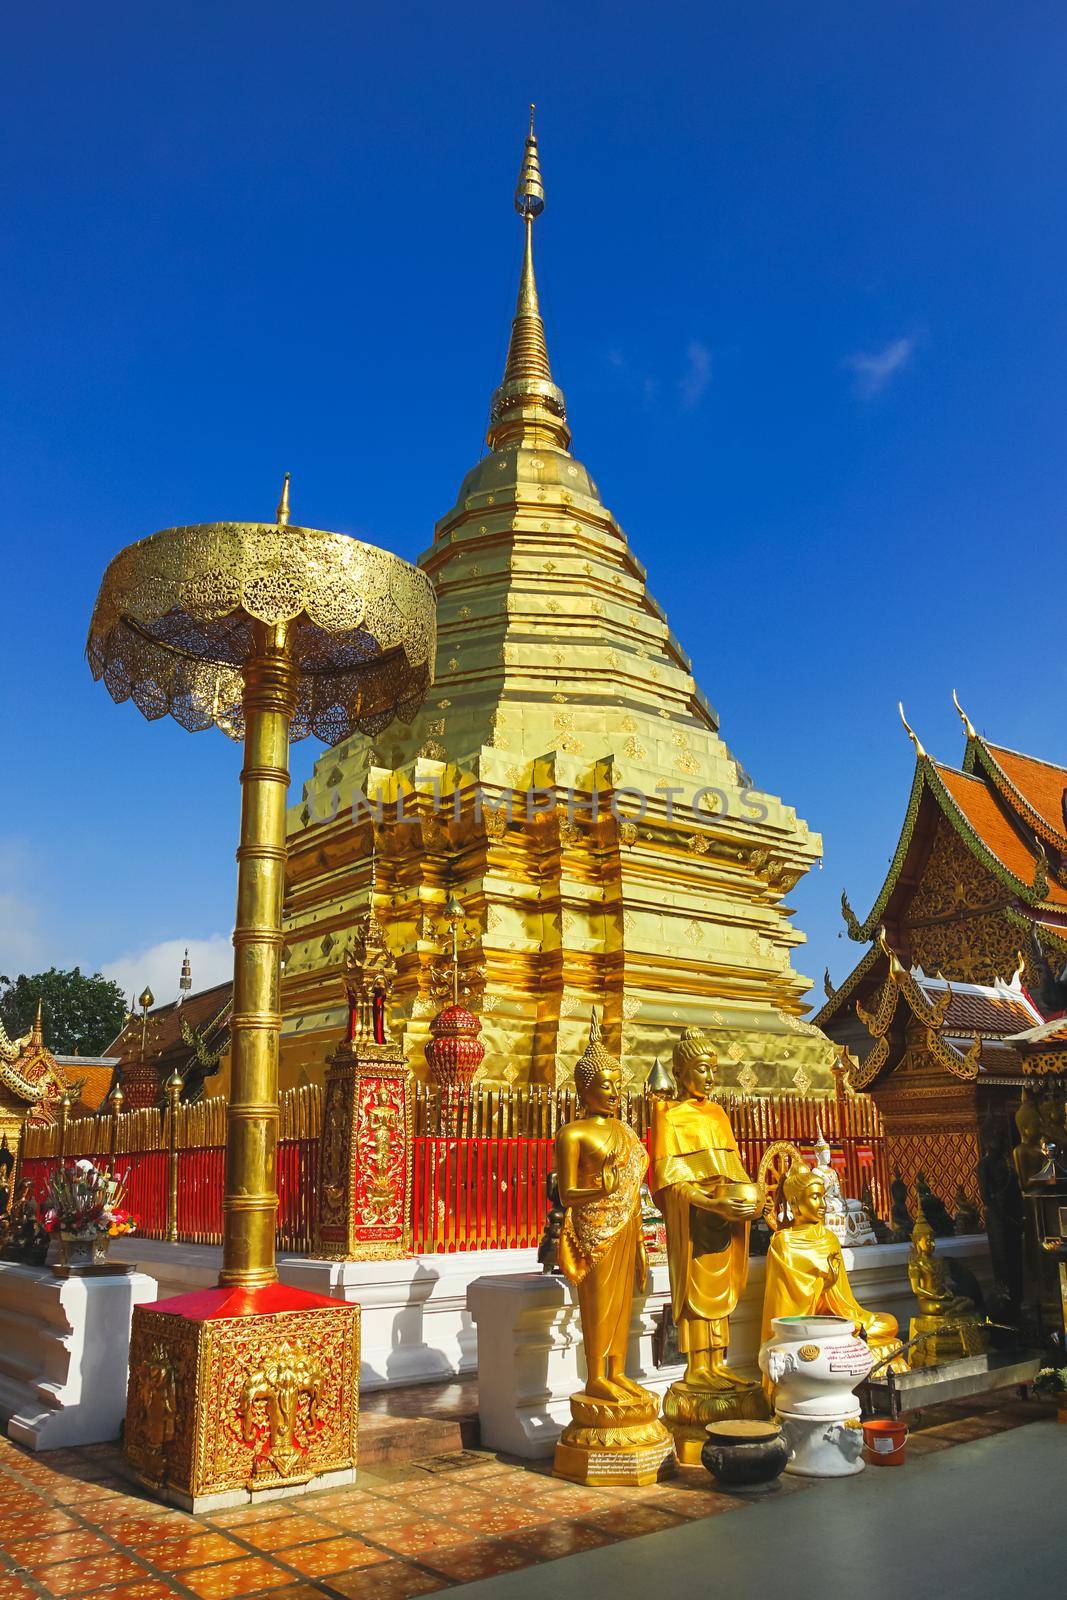 The world famous pagoda Phra That Doi Suthep in Chiang Mai province, Thailand.